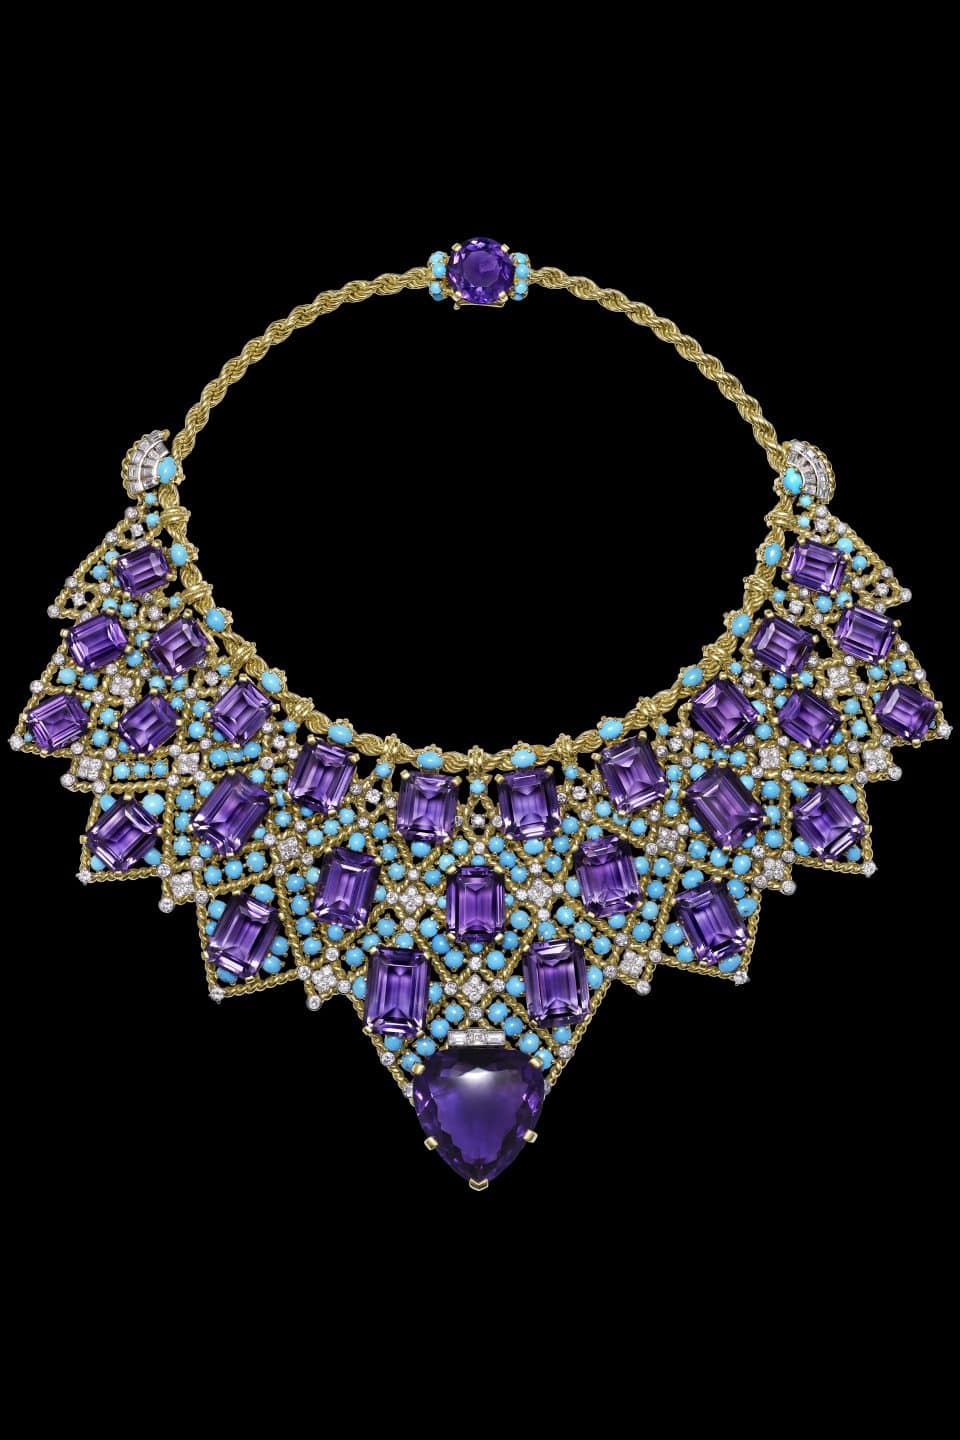 Discover Why Islamic Art Is an Enduring Influence on Cartier Jewelry